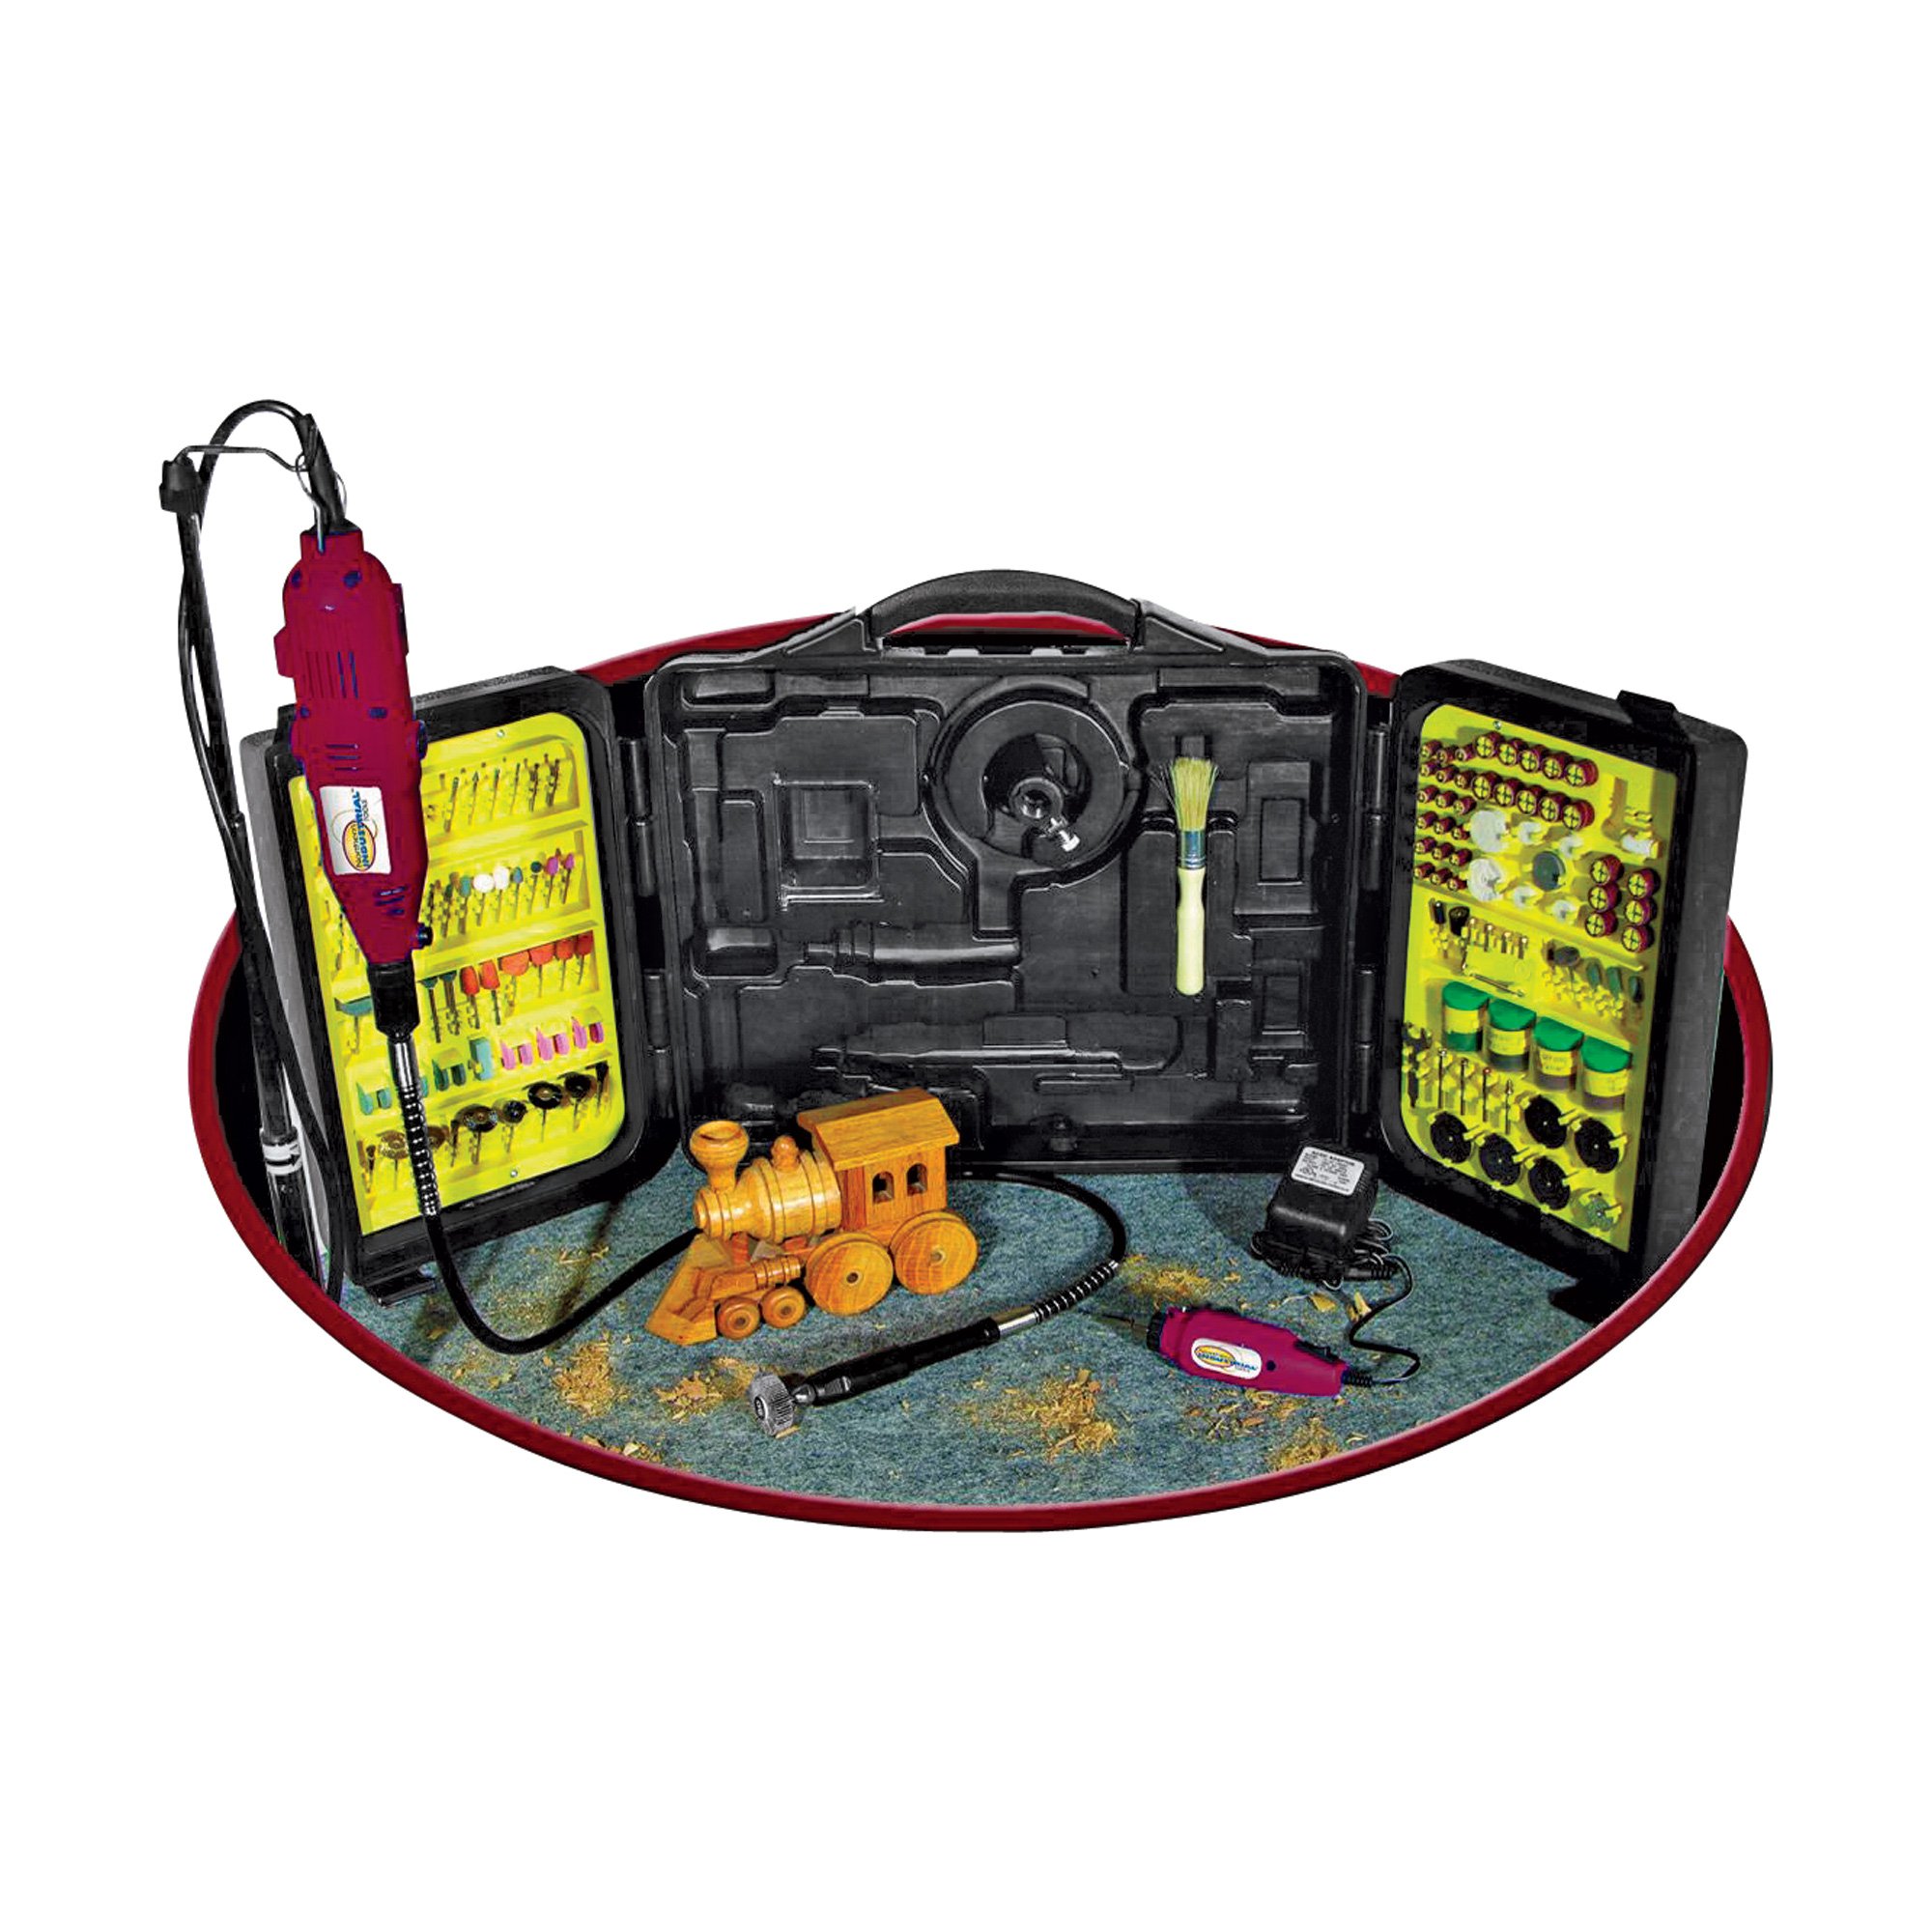 Northern Industrial Rotary Tool Kit — 30,000 RPM